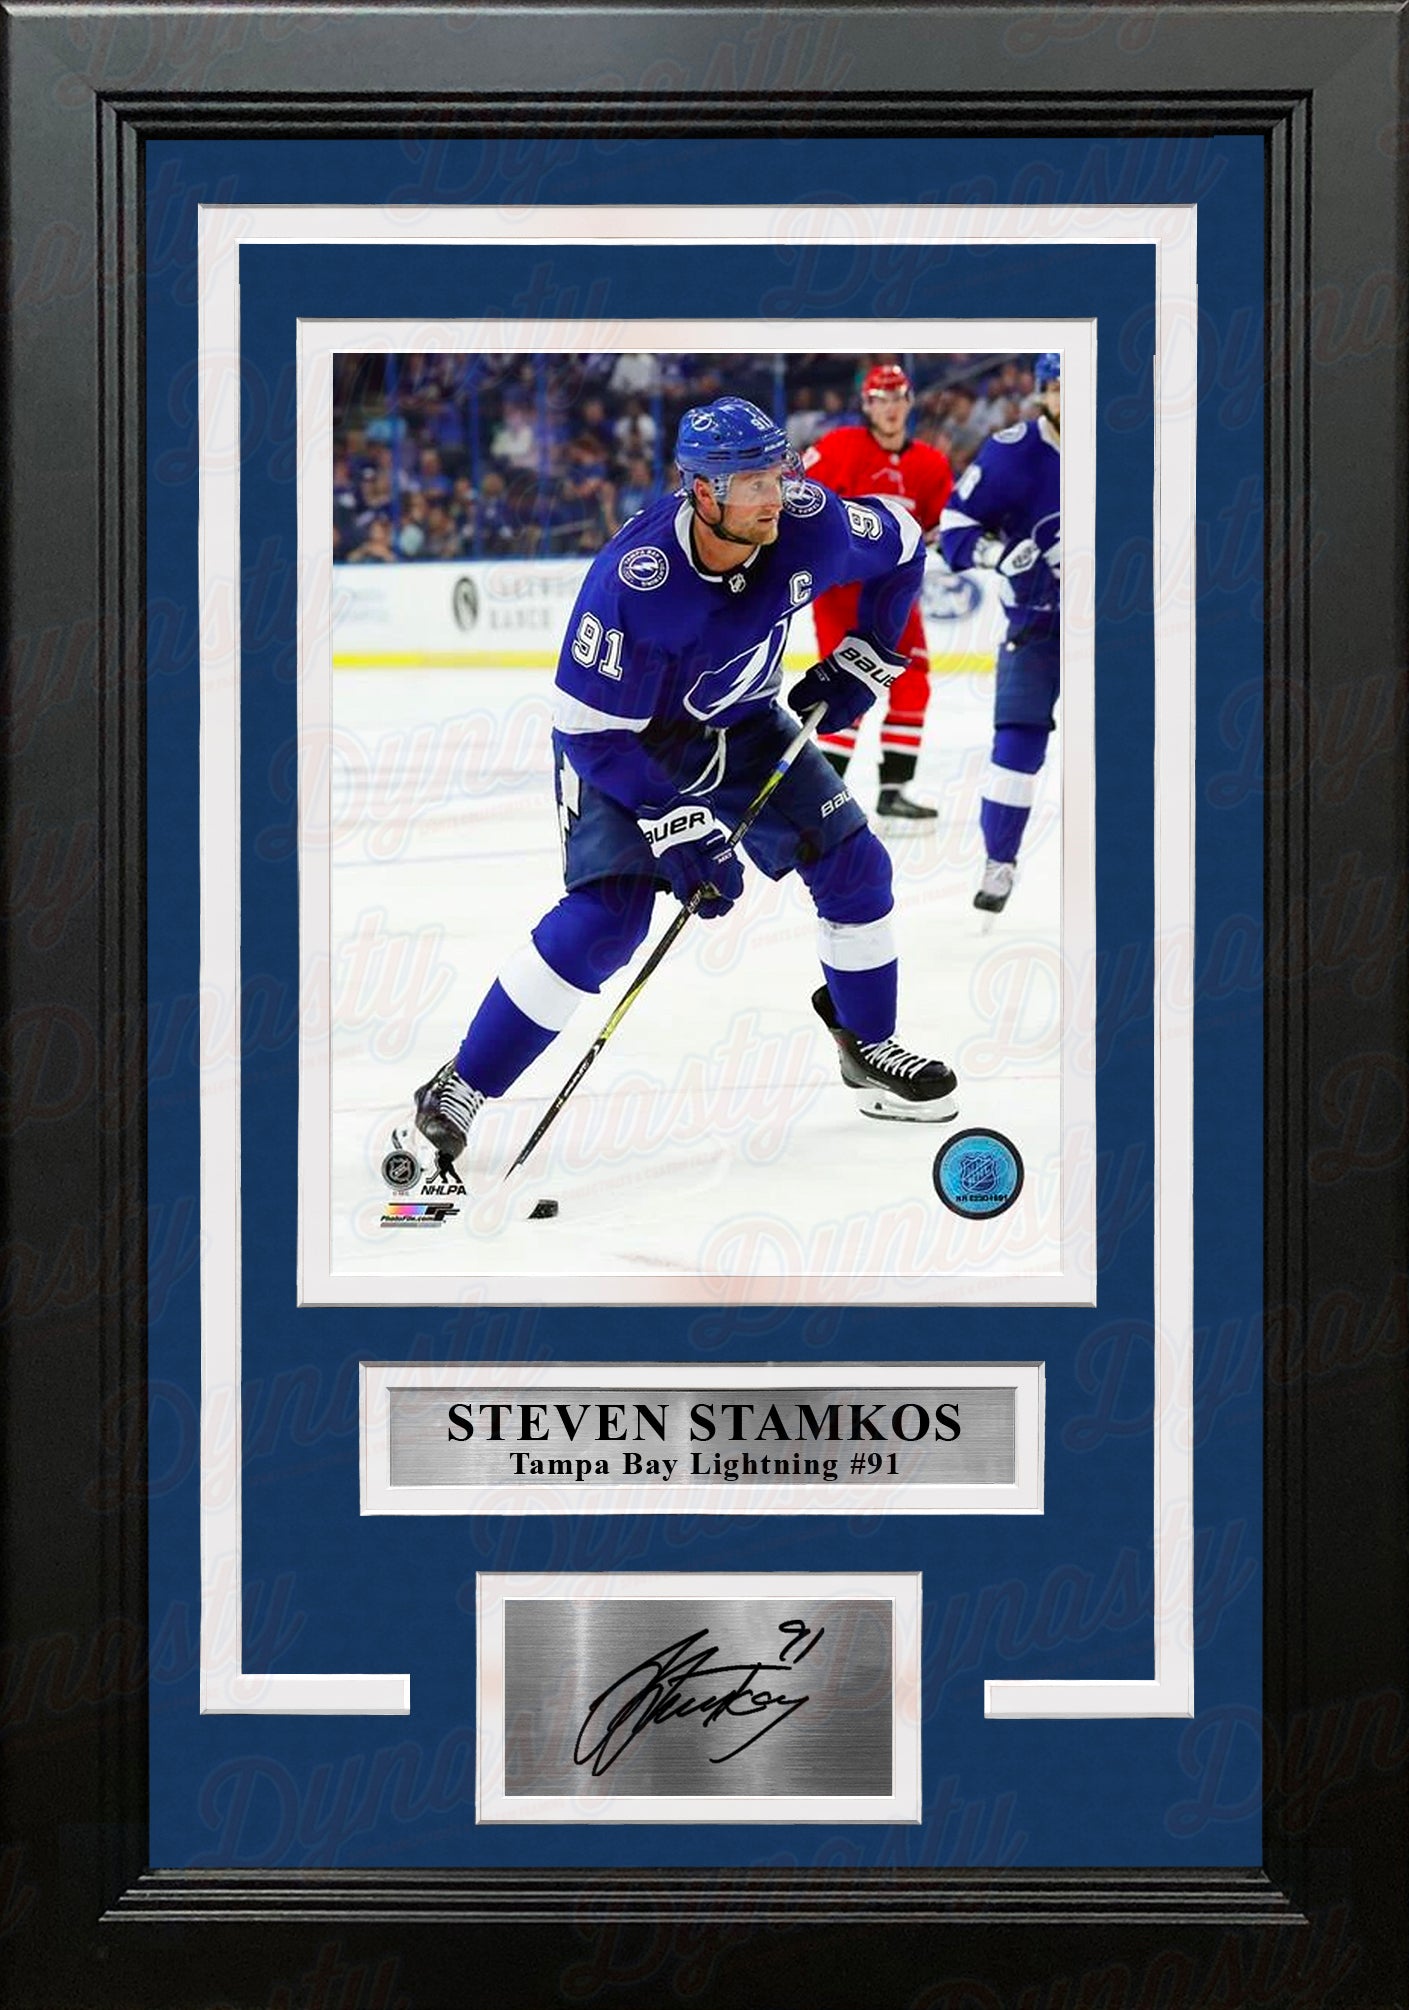 Lids Steven Stamkos Tampa Bay Lightning Fanatics Authentic Autographed  Framed 8 x 10 Raising the Cup Photograph